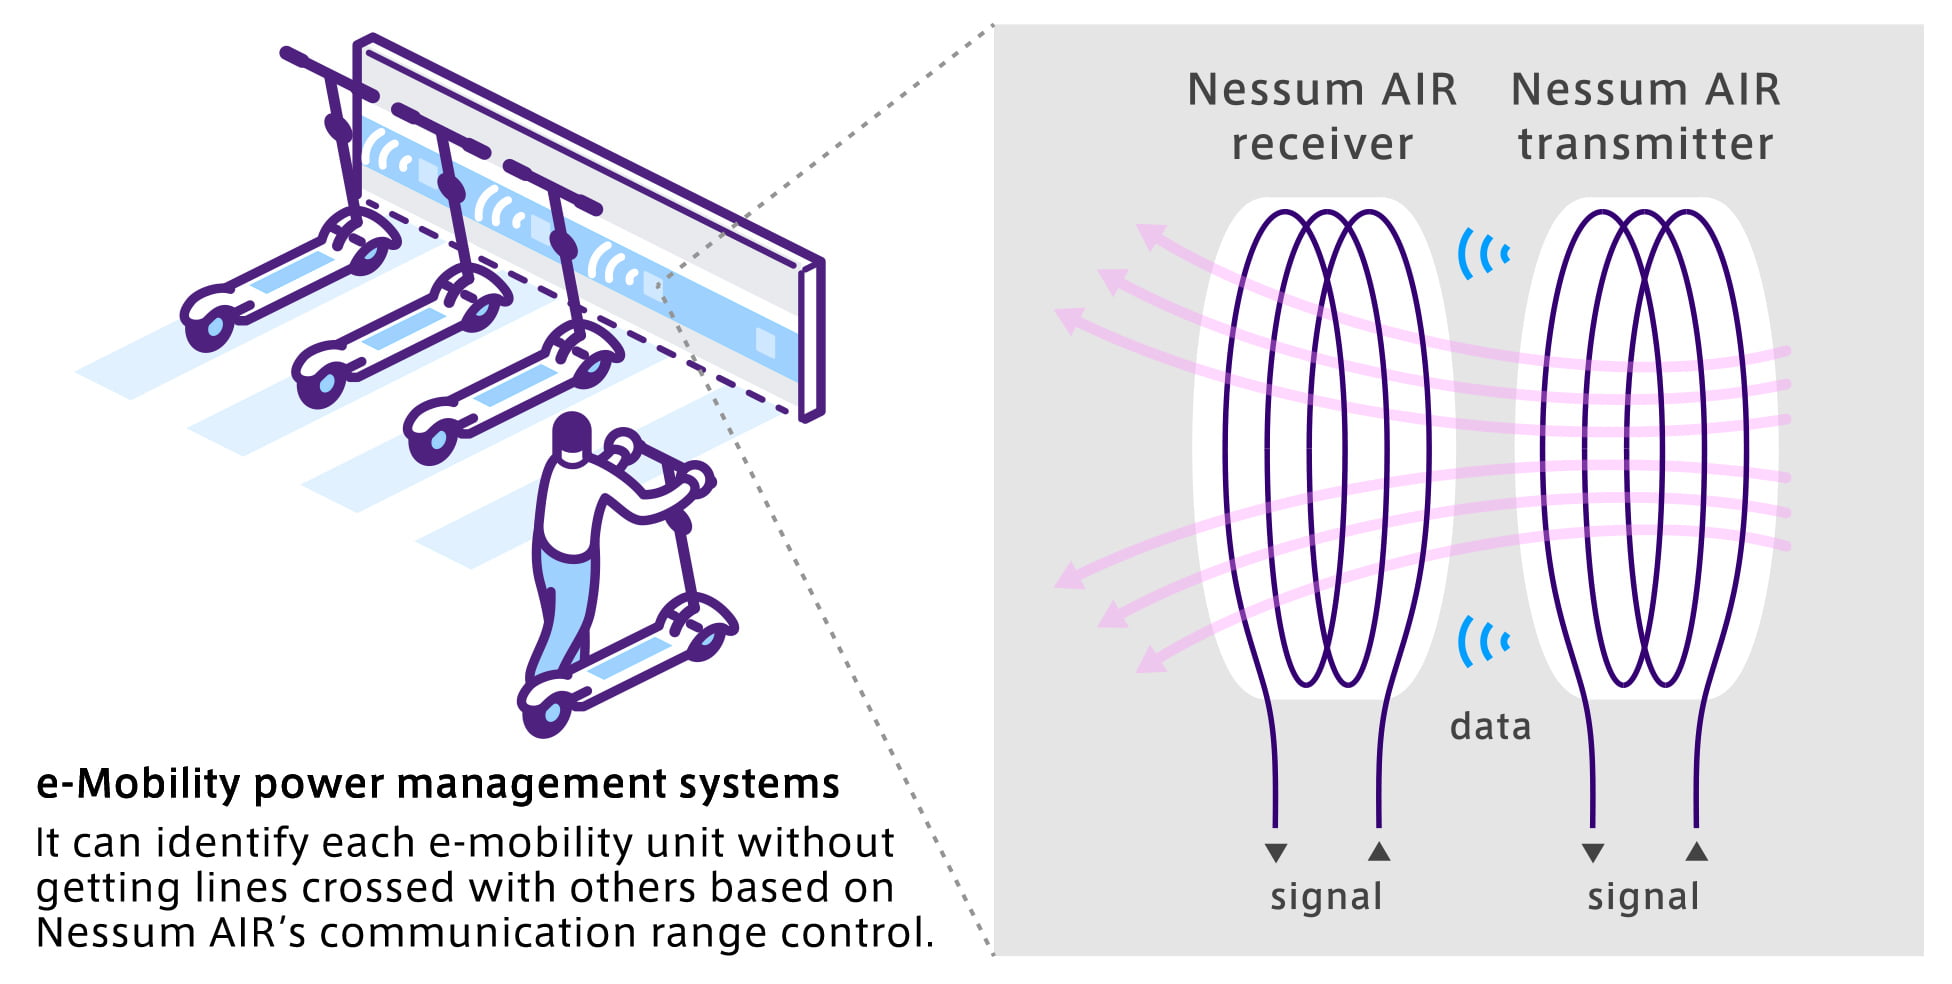 e-Mobility power management systems It can identify each e-mobility unit without getting lines crossed with others based on Nessum AIR's communication range control. Nessum AIR receiver signal Nessum AIR transmitter signal data